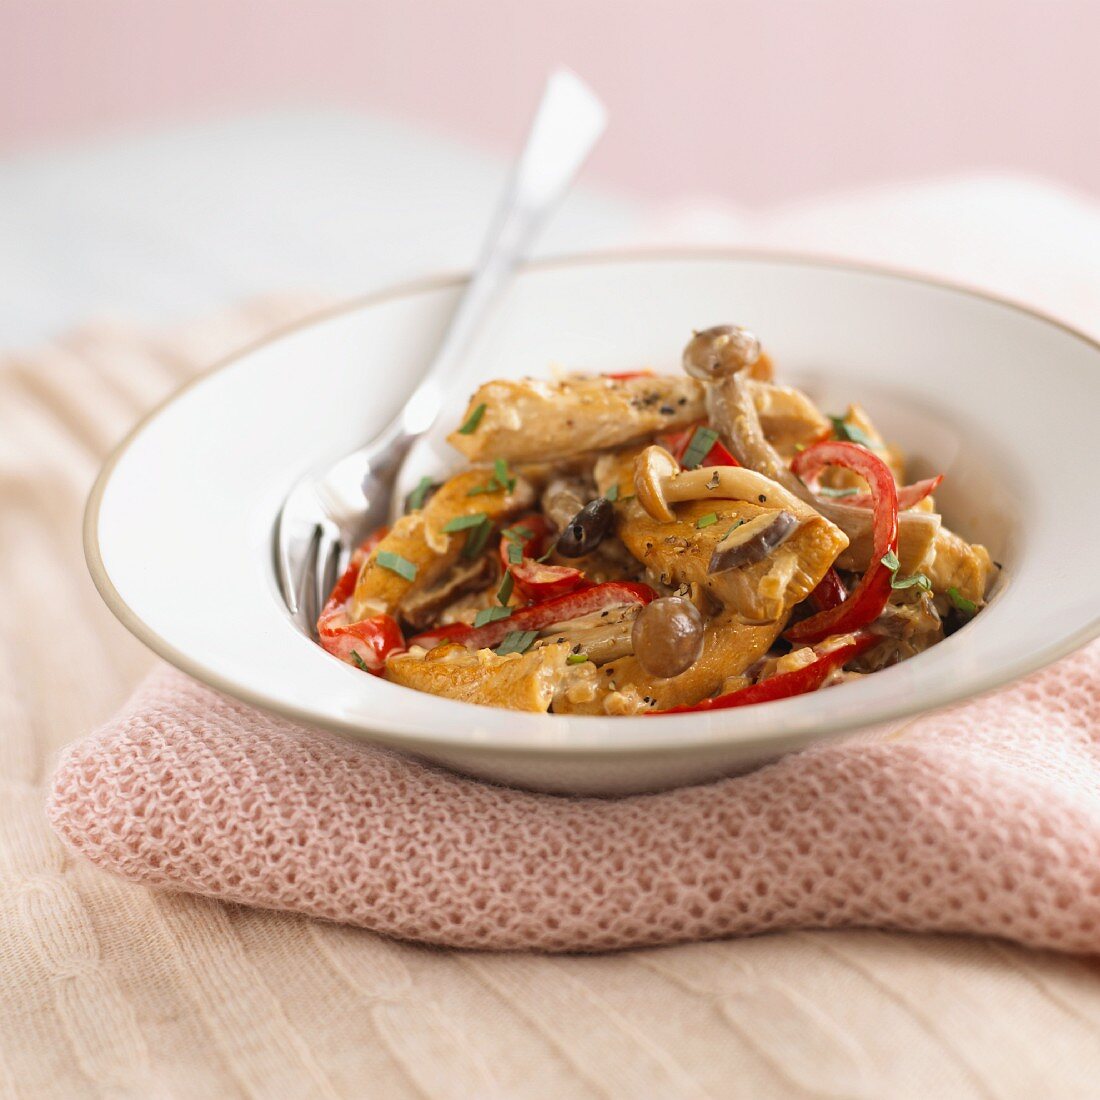 Pieces of chicken with mushrooms and peppers